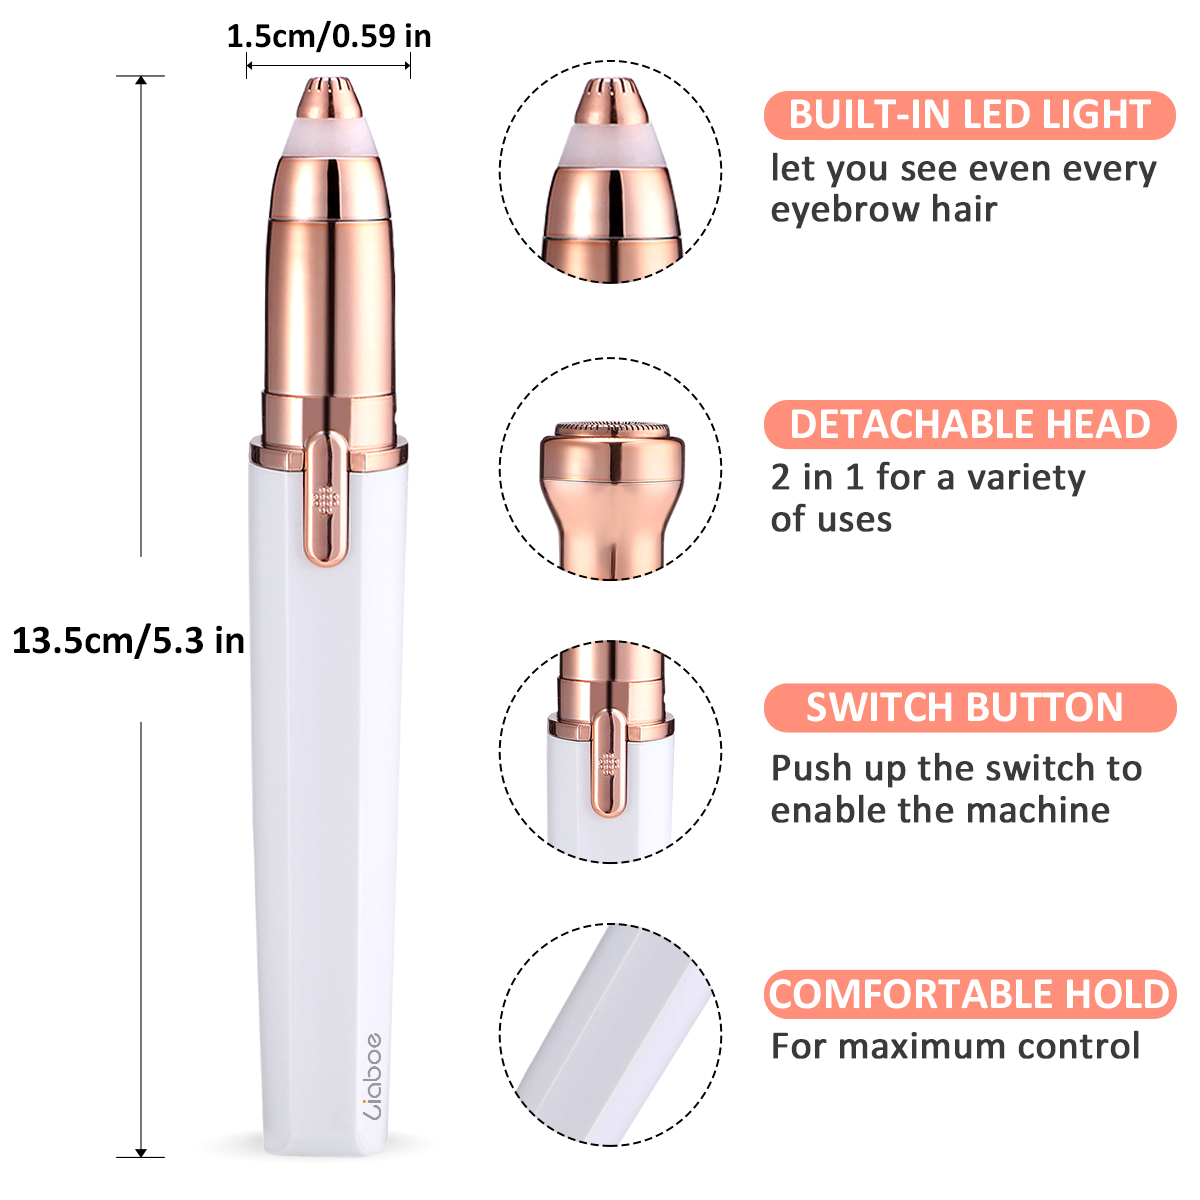 Hapord Eyebrow Hair Remover Hassle-Free Portable Finishing Touch Flawless Brows Removal Razor With Light Battery Included